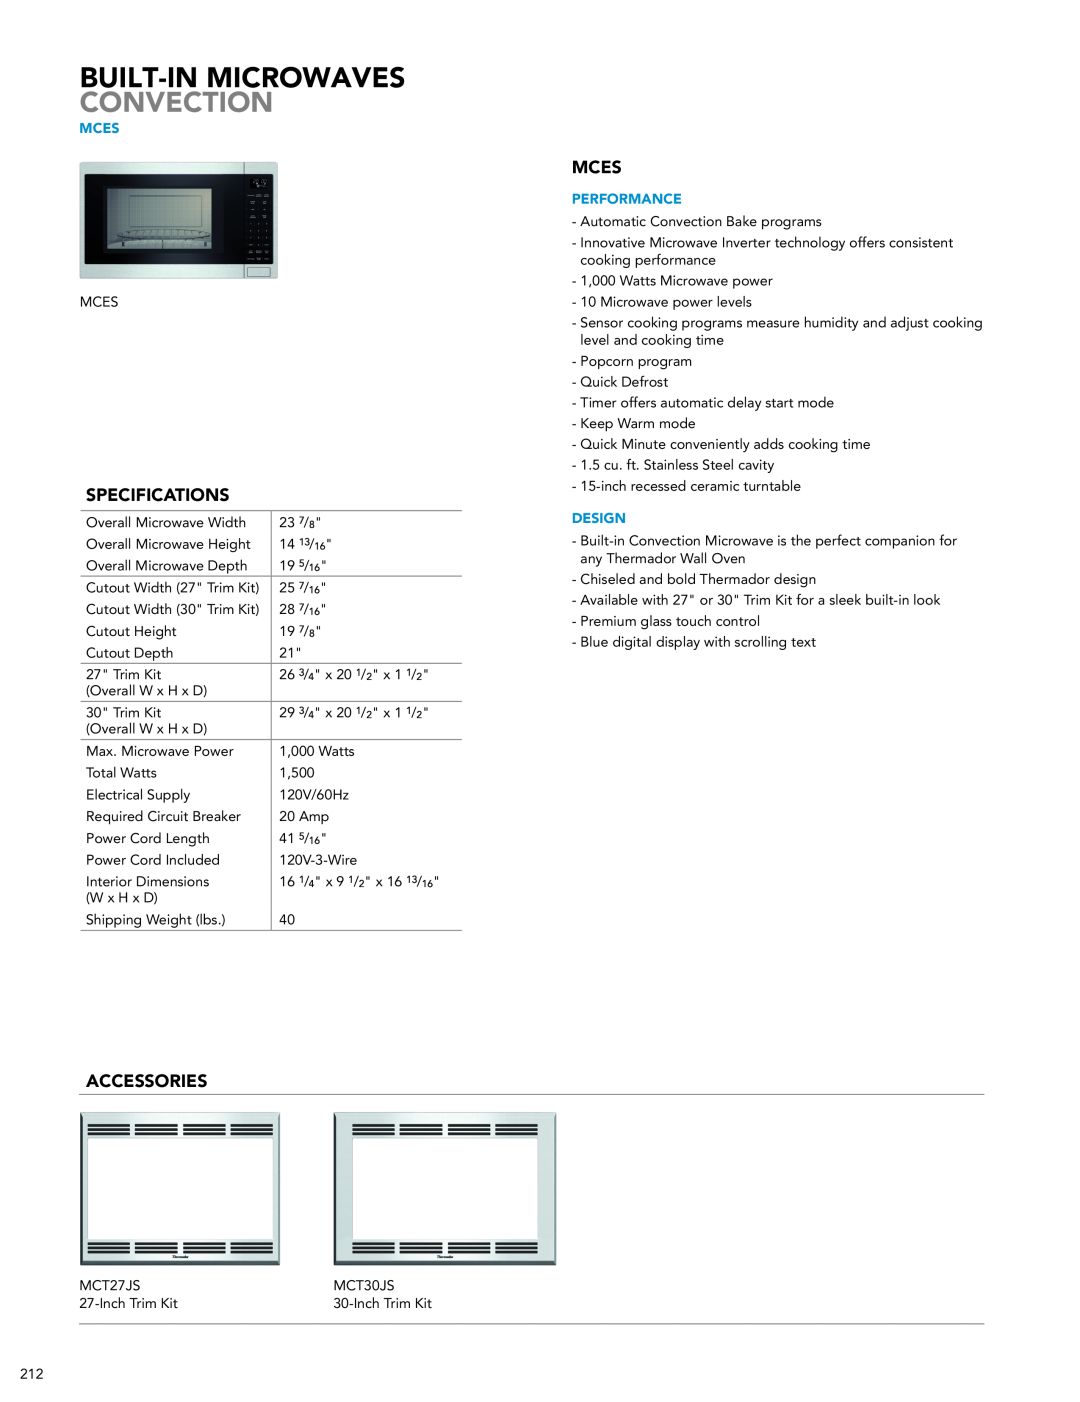 Thermador MD24JS manual Built-In Microwaves Convection, Mces, Specifications, Accessories, Performance, Design 